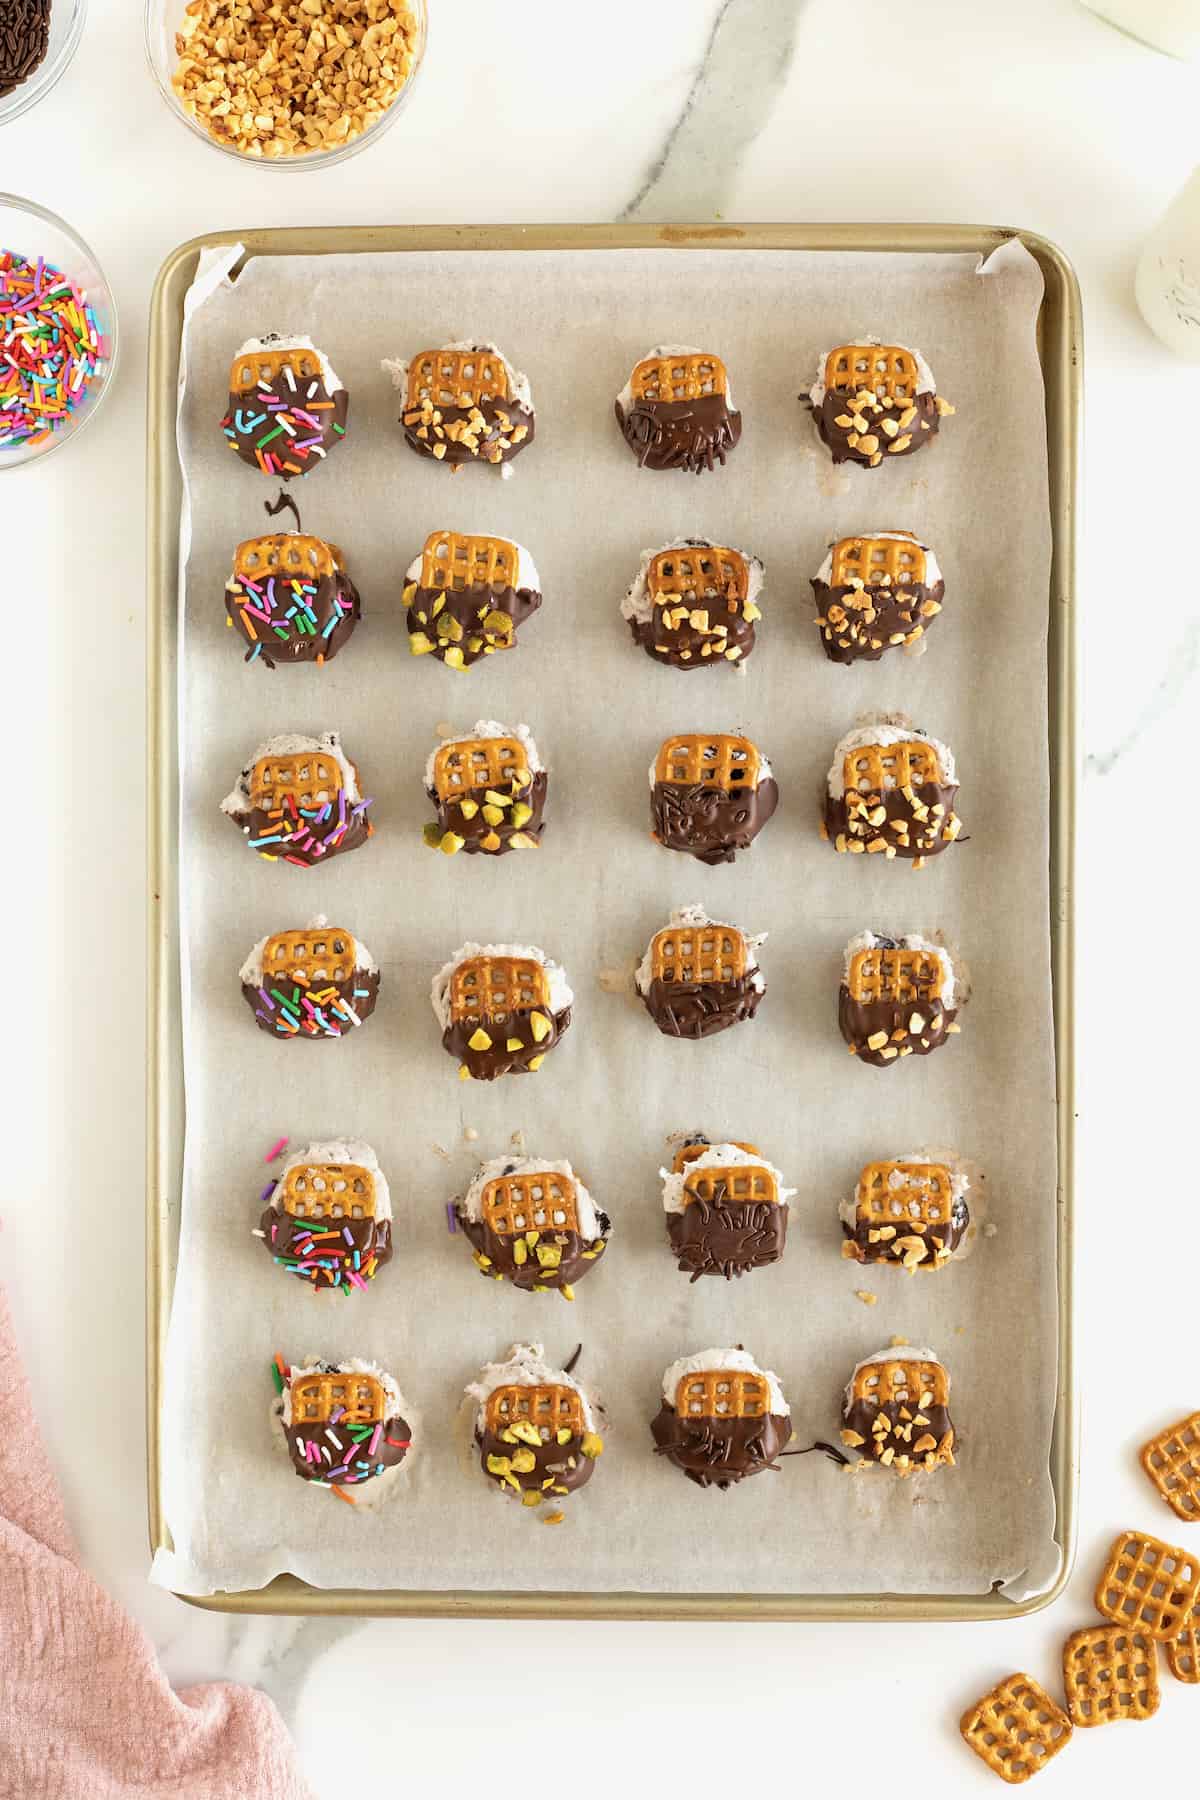 A parchment lined baking tray filled with pretzel snap ice cream bites dipped in chocolate and coated in sprinkles and chopped nuts.